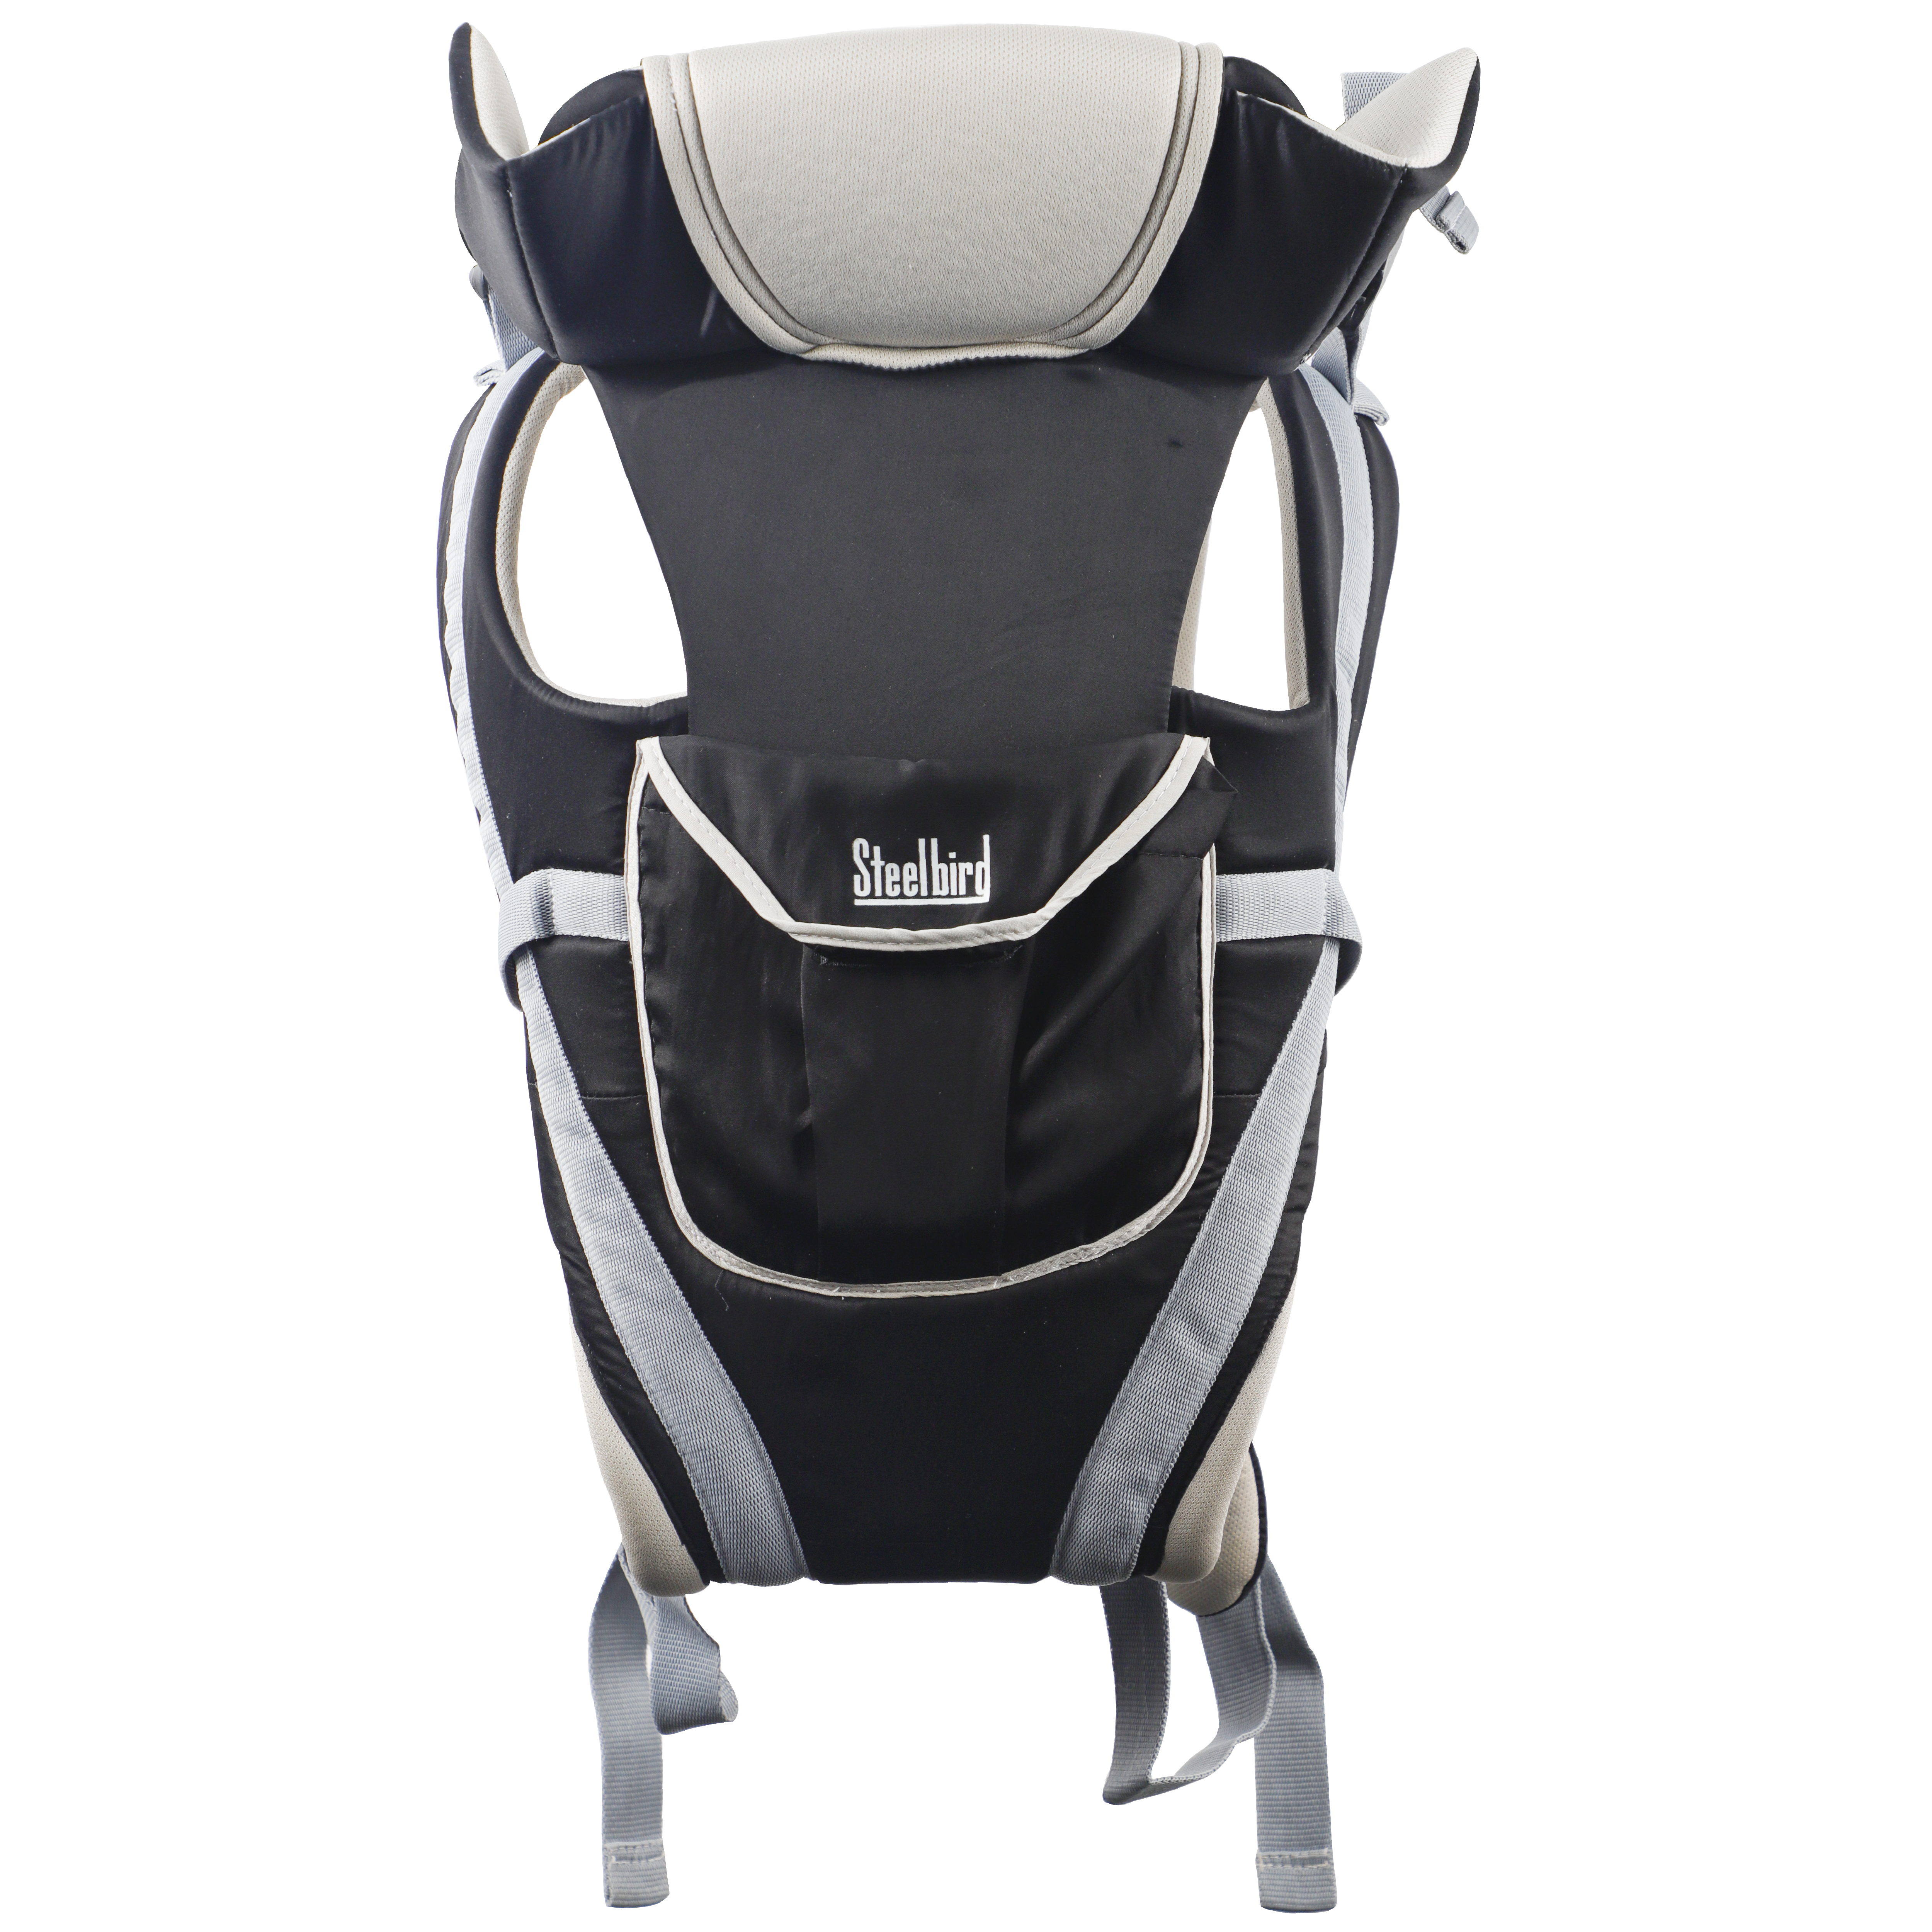 Steelbird Premium Kids 4-in-1 Adjustable Baby Carrier Cum Kangaroo Bag With Lumbar Support-Lightweight And Breathable-Back-Front Carrier For Baby With Safety Belt-Max Weight Up To 15 Kg (Grey Black)